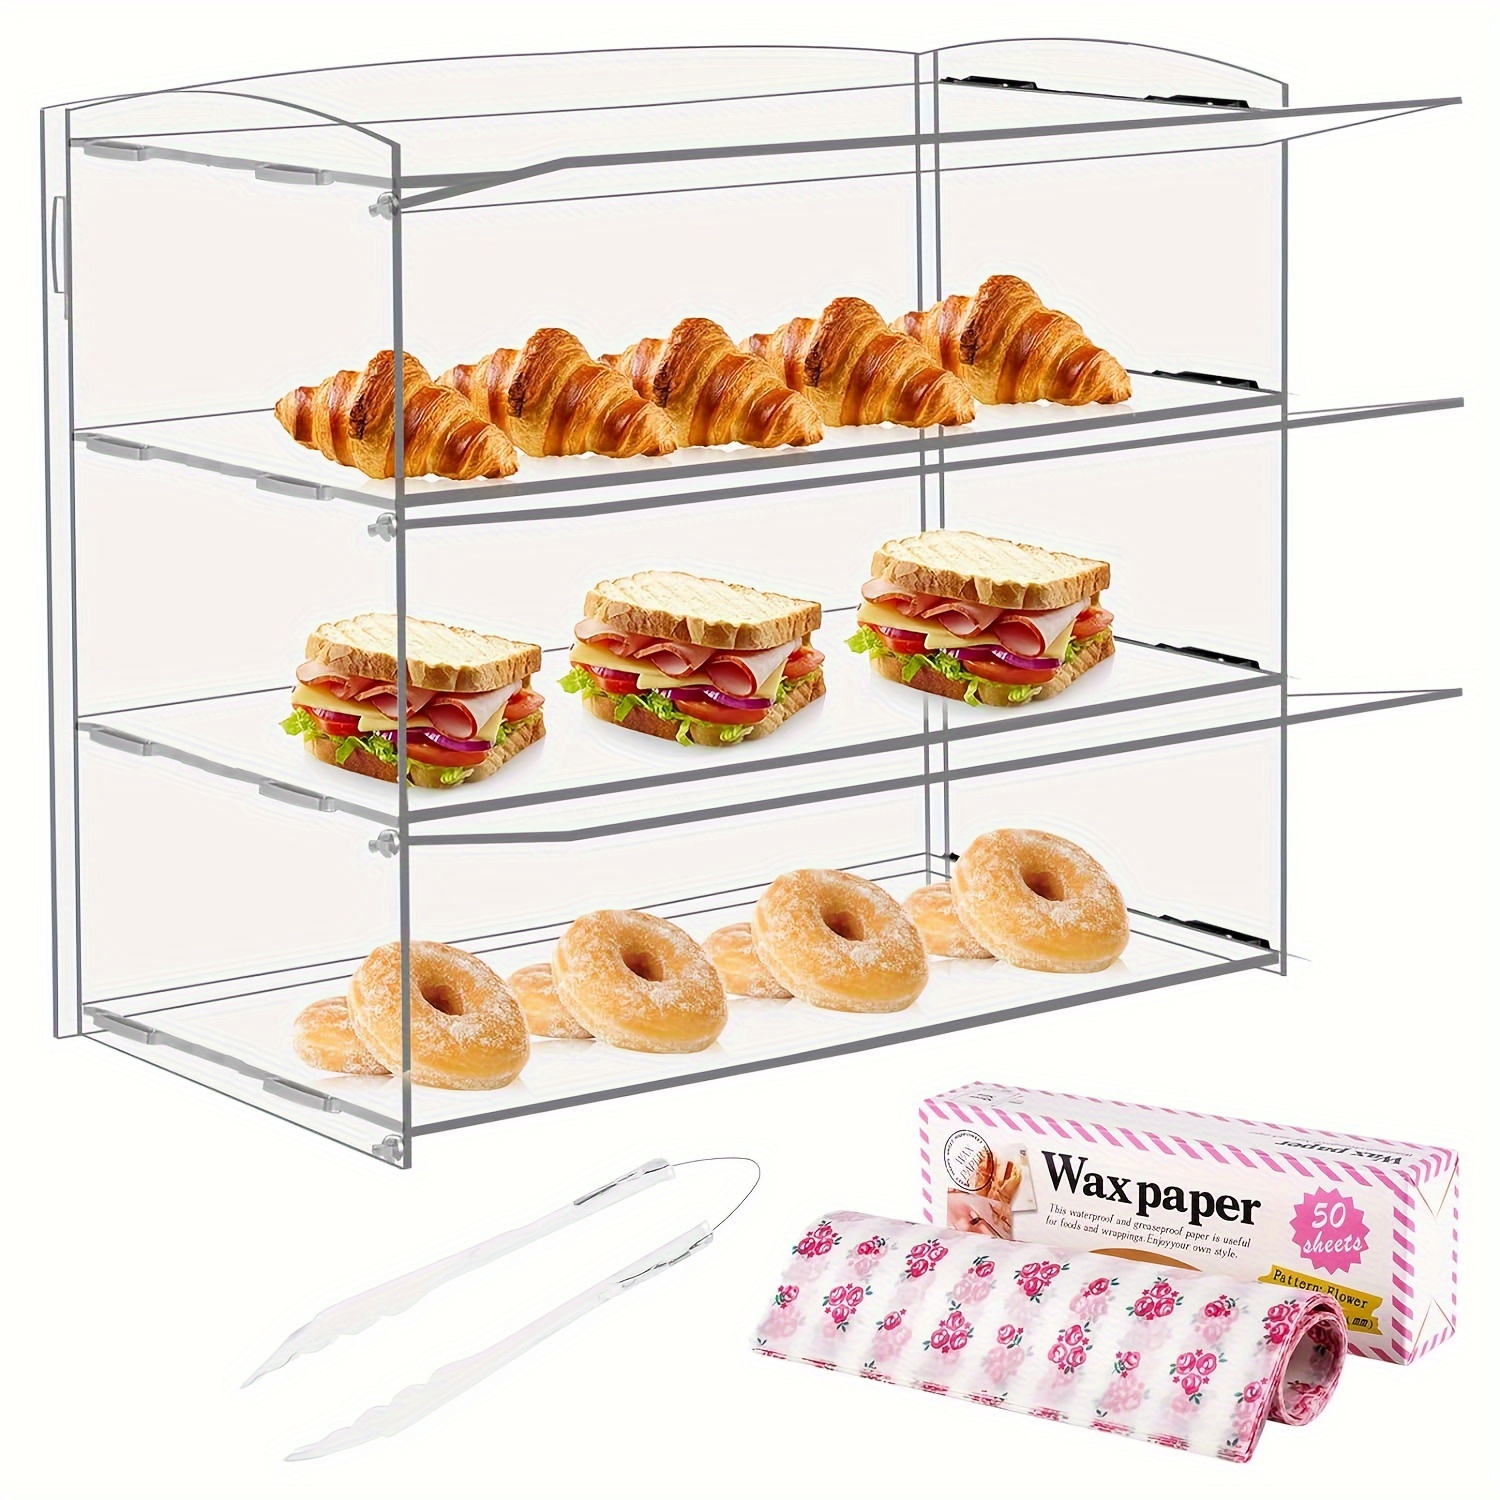 

Acrylic Countertop Display Case - Clear Bakery Pastry Cabinet With Removable Shelves - Retail Doughnut, Cookie, And Cupcake Display Case With Wax Paper And Tongs - 2 And 3 Tier Options